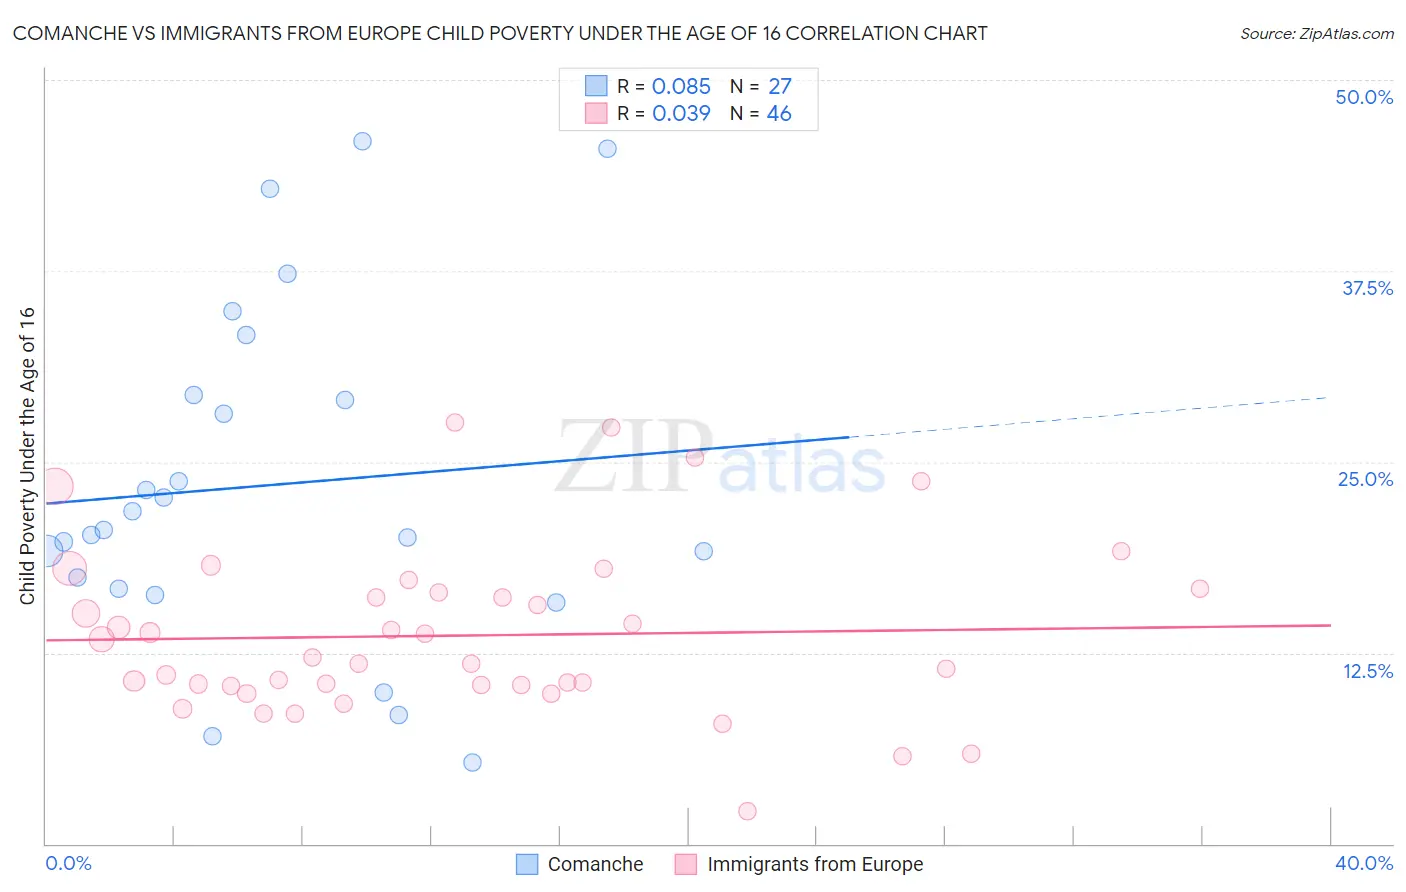 Comanche vs Immigrants from Europe Child Poverty Under the Age of 16